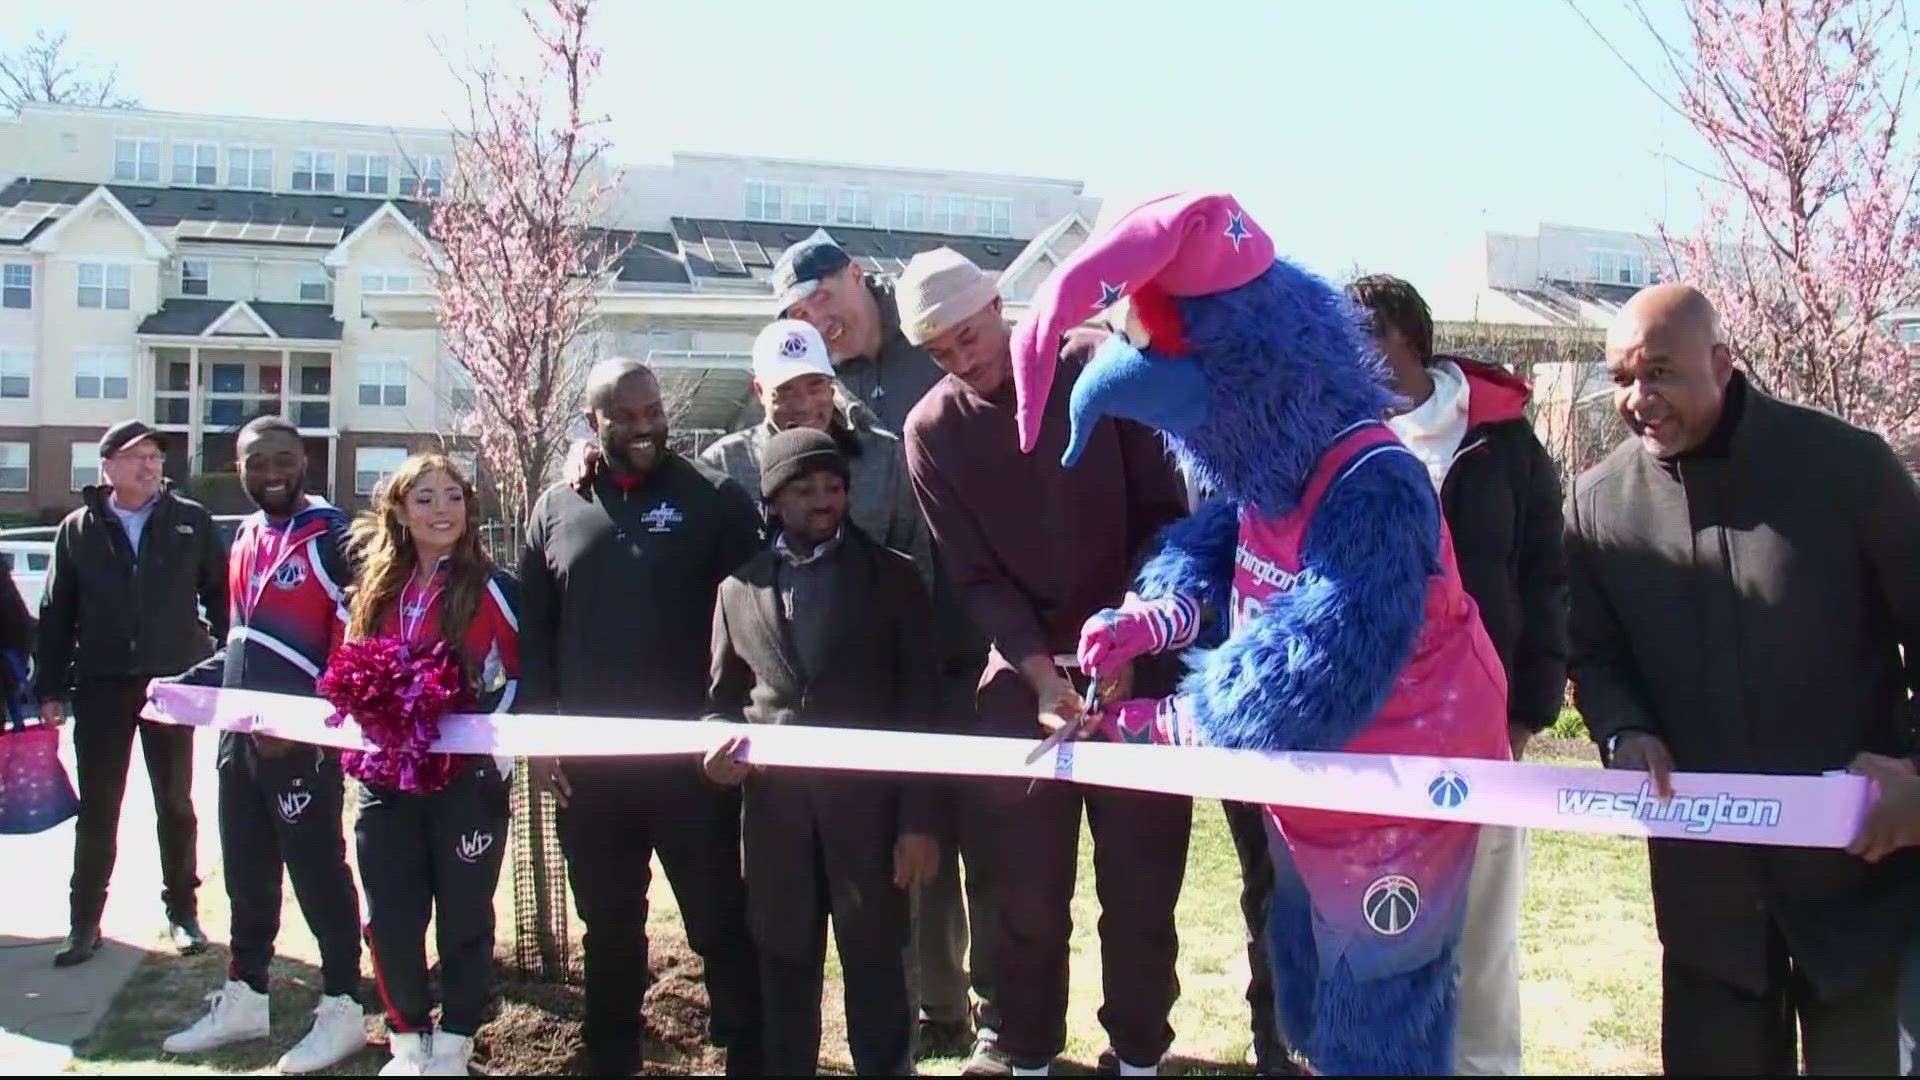 Twenty-five trees, including cherry trees, were planted around the District to celebrate the Washington Wizards rebranding.